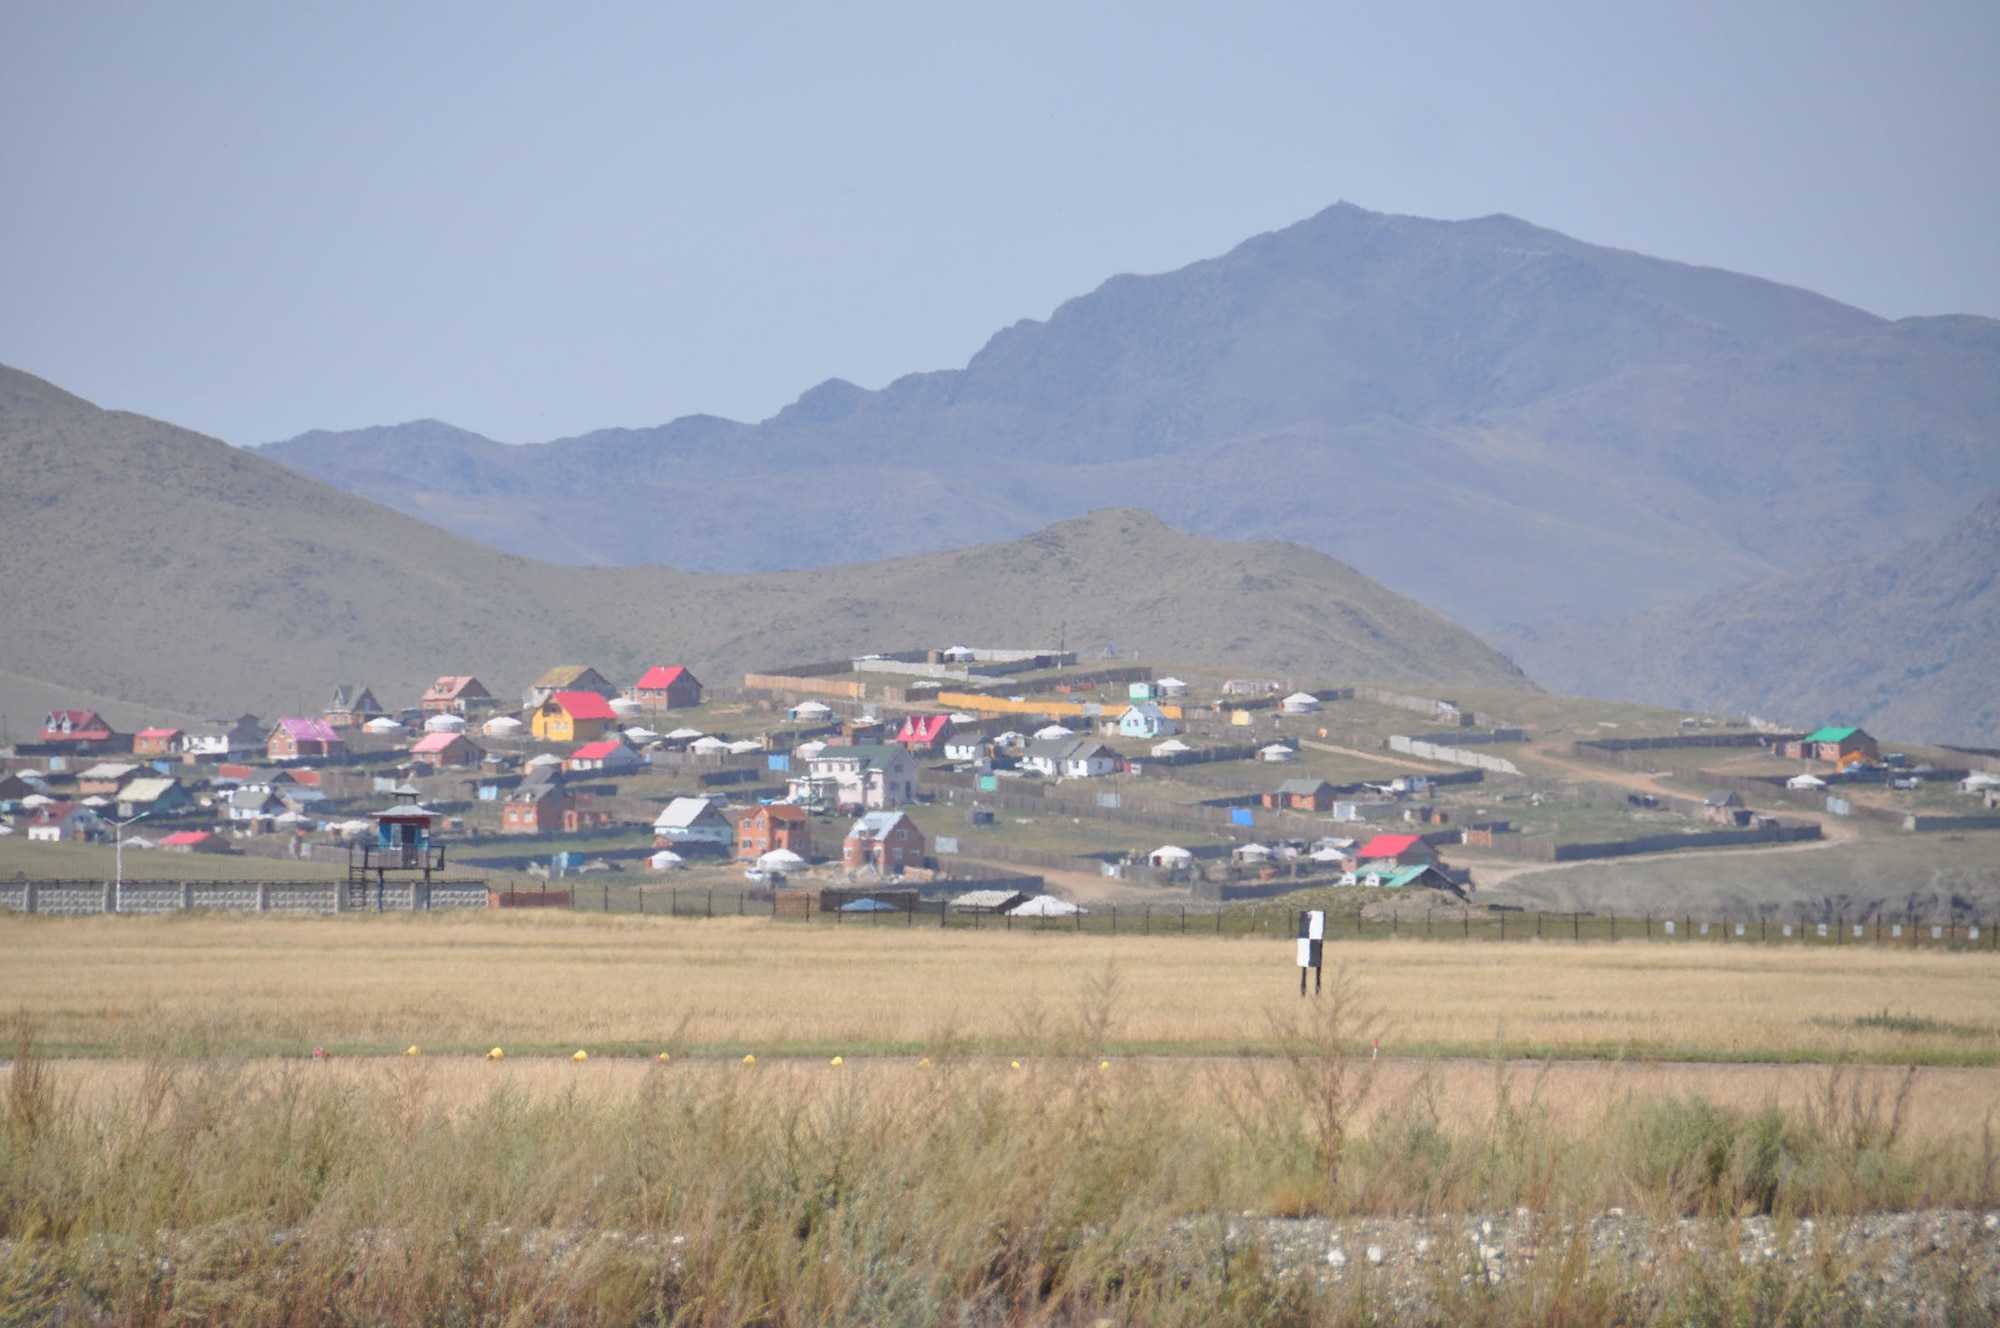 During a space debris retrieval mission in August, 2011, veteran airlift crew members from March Air Reserve Base, Calif., said Mongolia seemed much unchanged since the military's first flight into the country in 1991.  Here a village sits on a hill overlooking the Chinngis Khaan International Airport in Mongolia, Aug. 26, 2011. (U.S. Air Force photo/Master Sgt. Linda Welz)

A Mongolian village sits on a hill overlooking the airport where the March C-17 picked up the rocket debris.